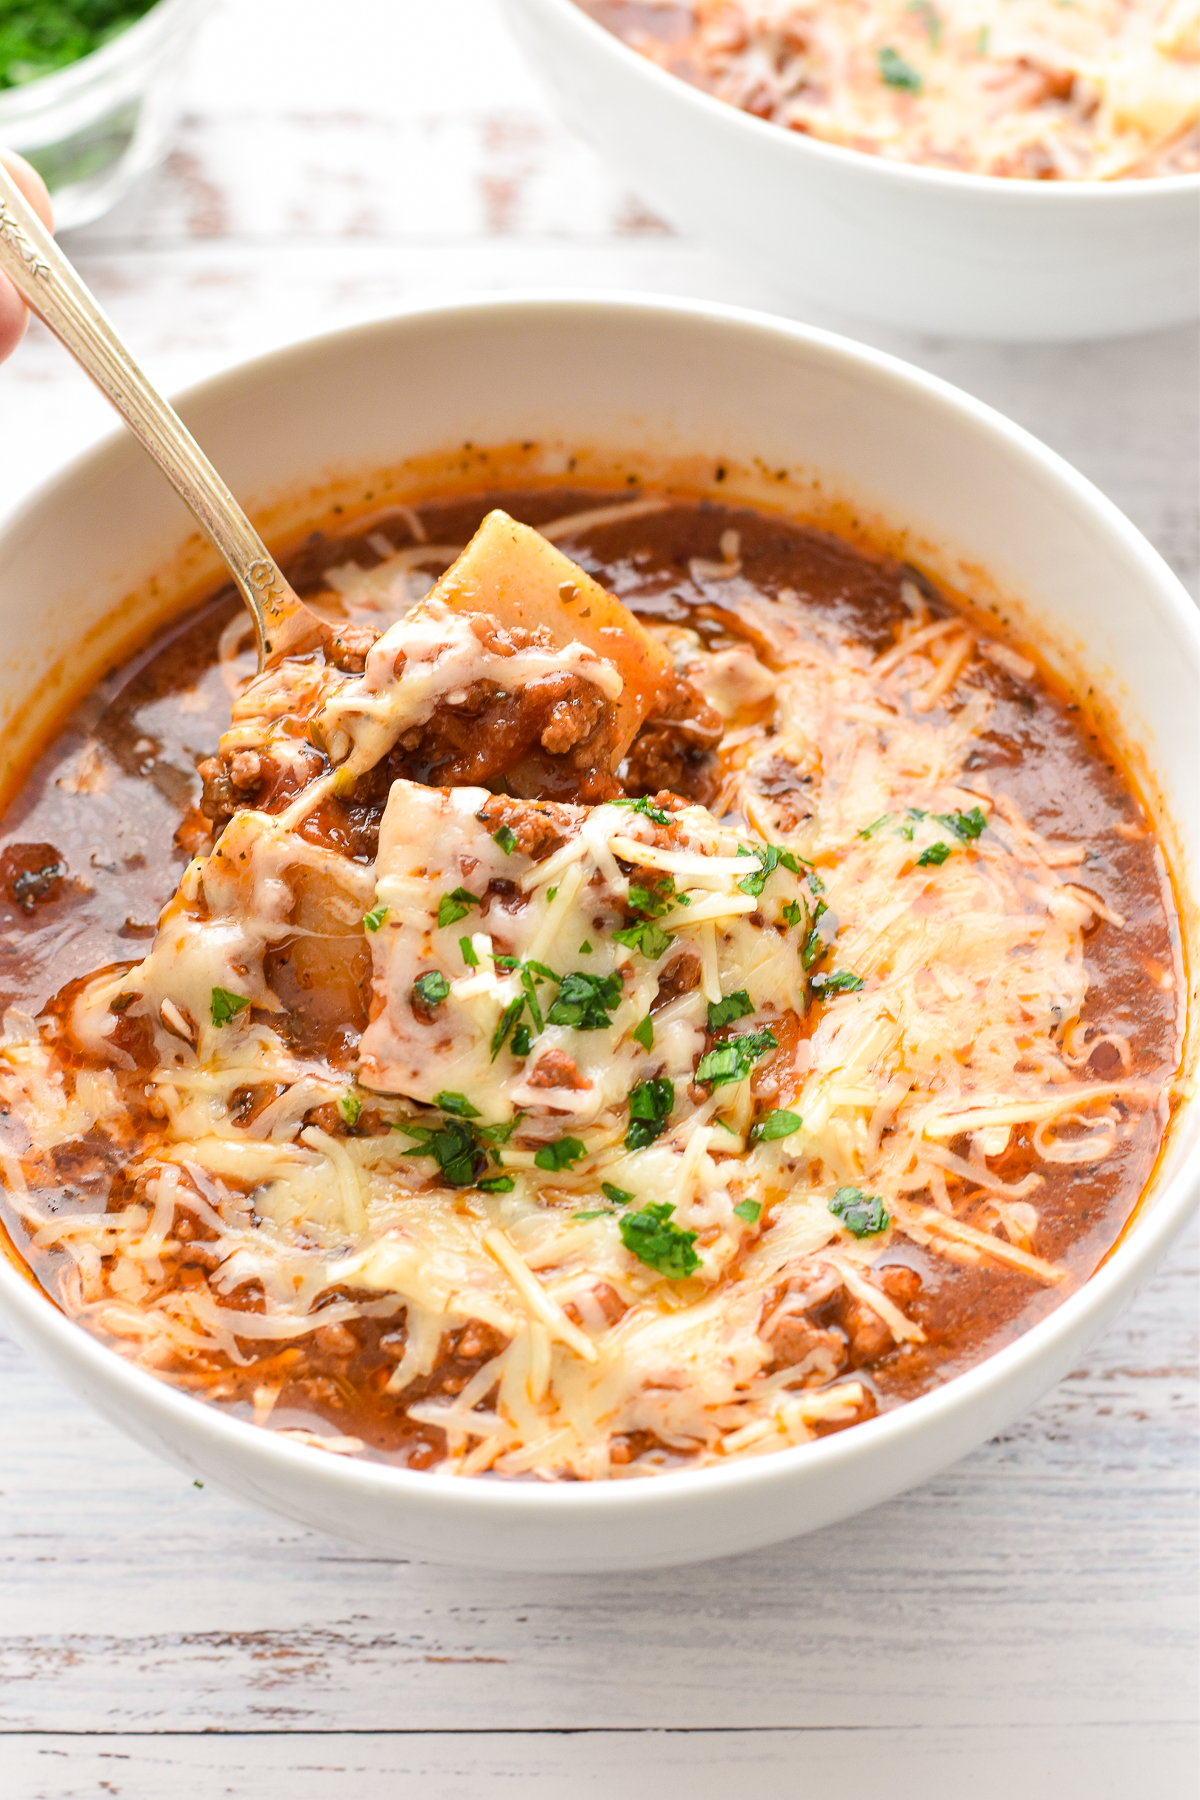 low fodmap lasagna soup scooped up by a spoon in a white bowl on a white background.